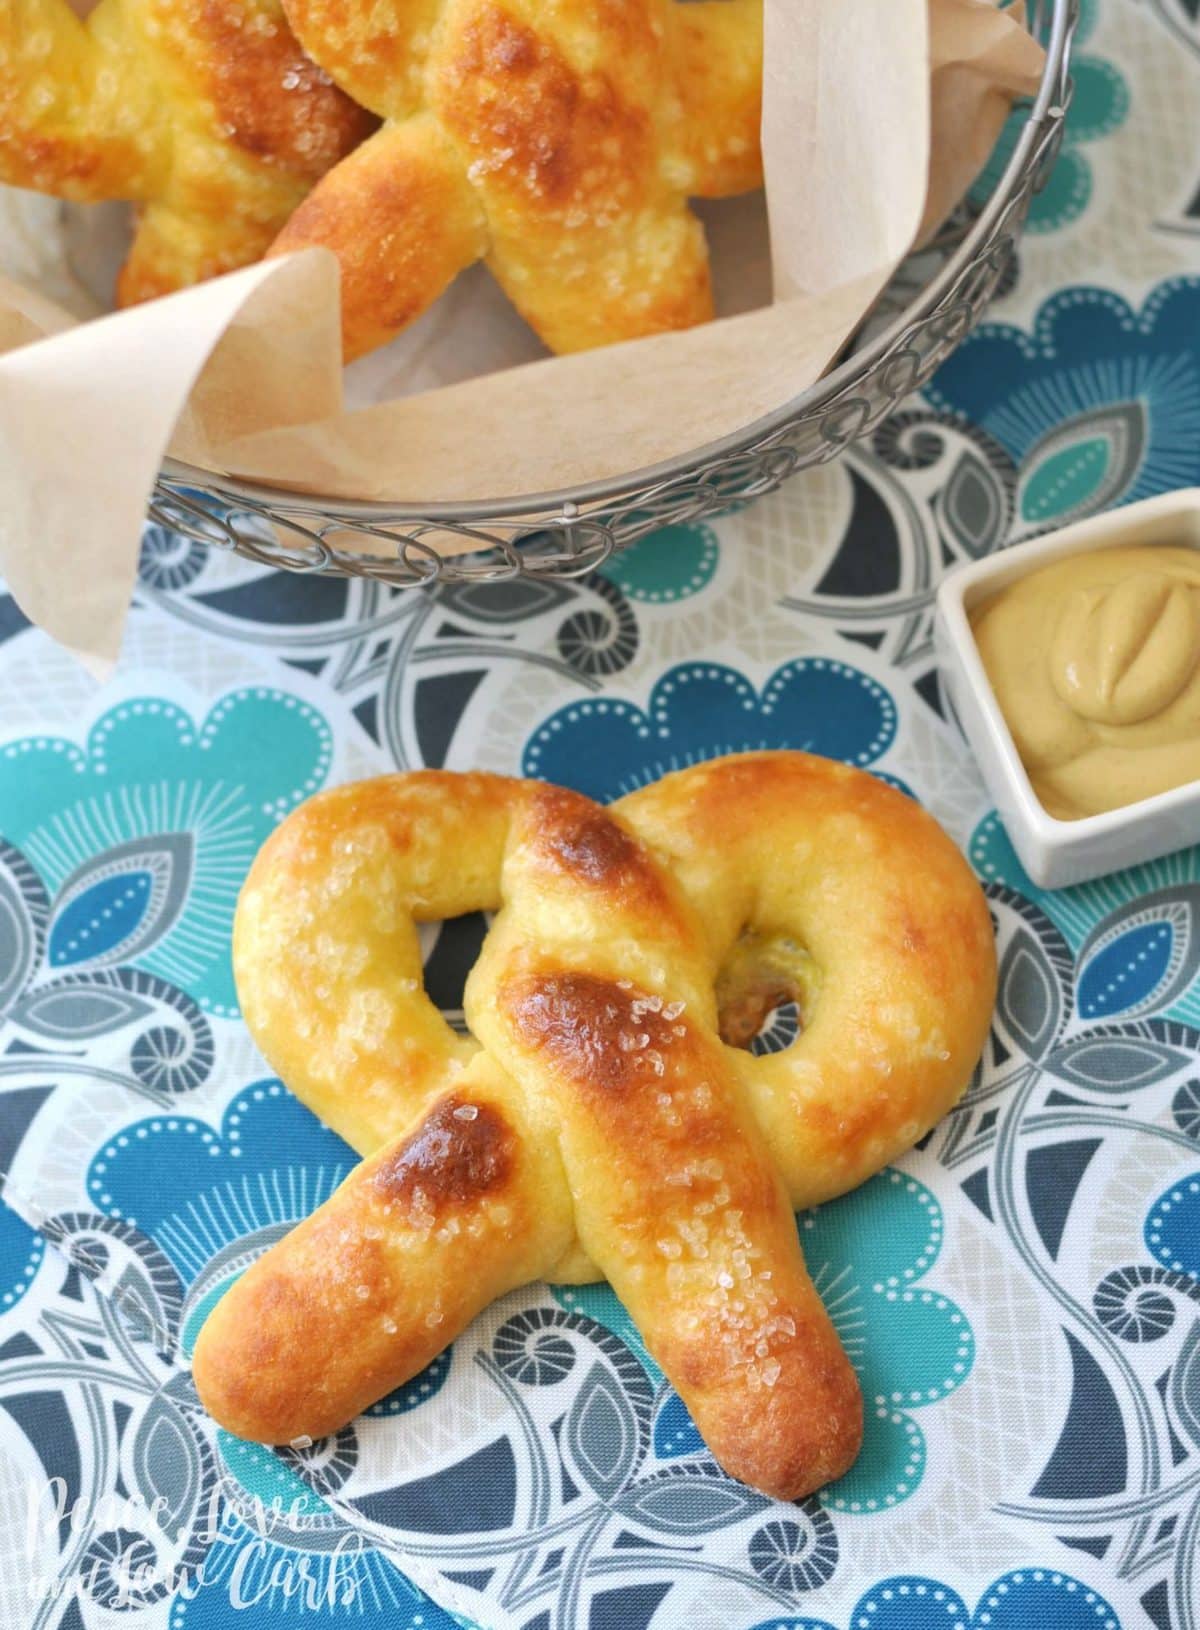 On a gray countertop with a white patterned backsplash, a metal basked with parchment paper loaded with keto soft pretzels sits to the left side of the frame on top of an aqua, gray, black, and blue tablecloth. At the center of the photo sits a golden brown keto soft pretzel with a small white square sauce dish full of mustard.